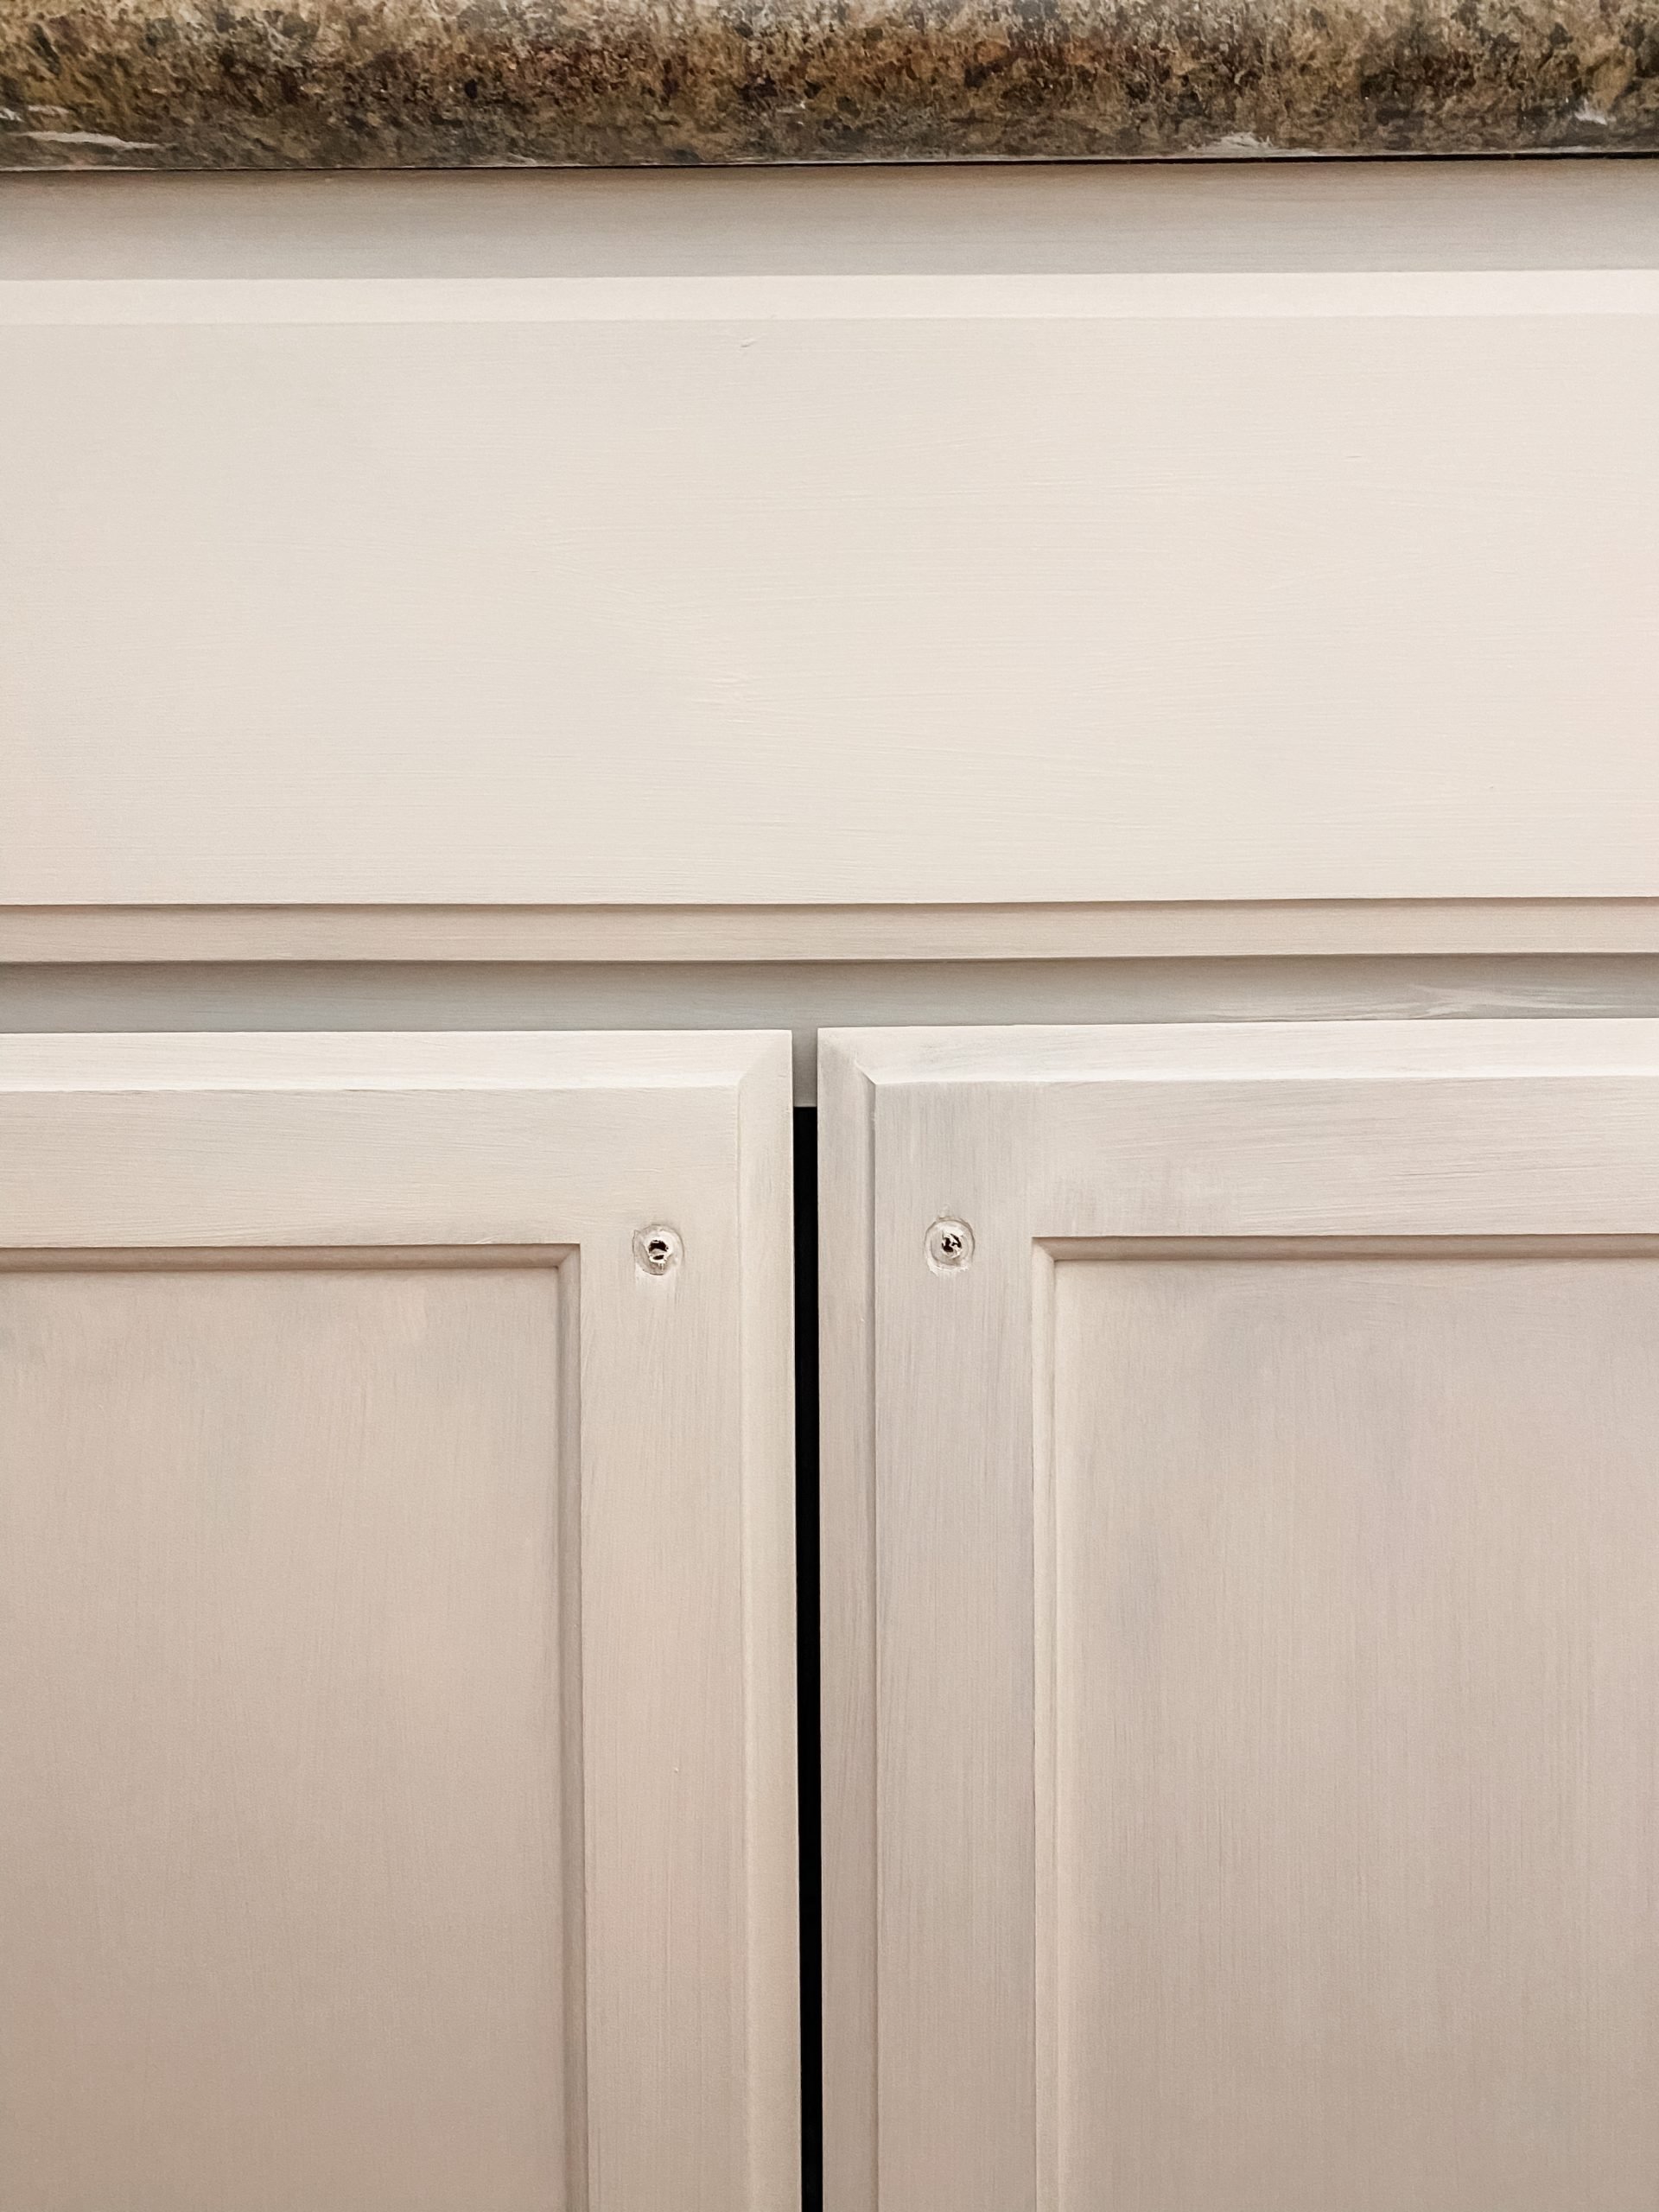 paint your bathroom cabinets in one weekend